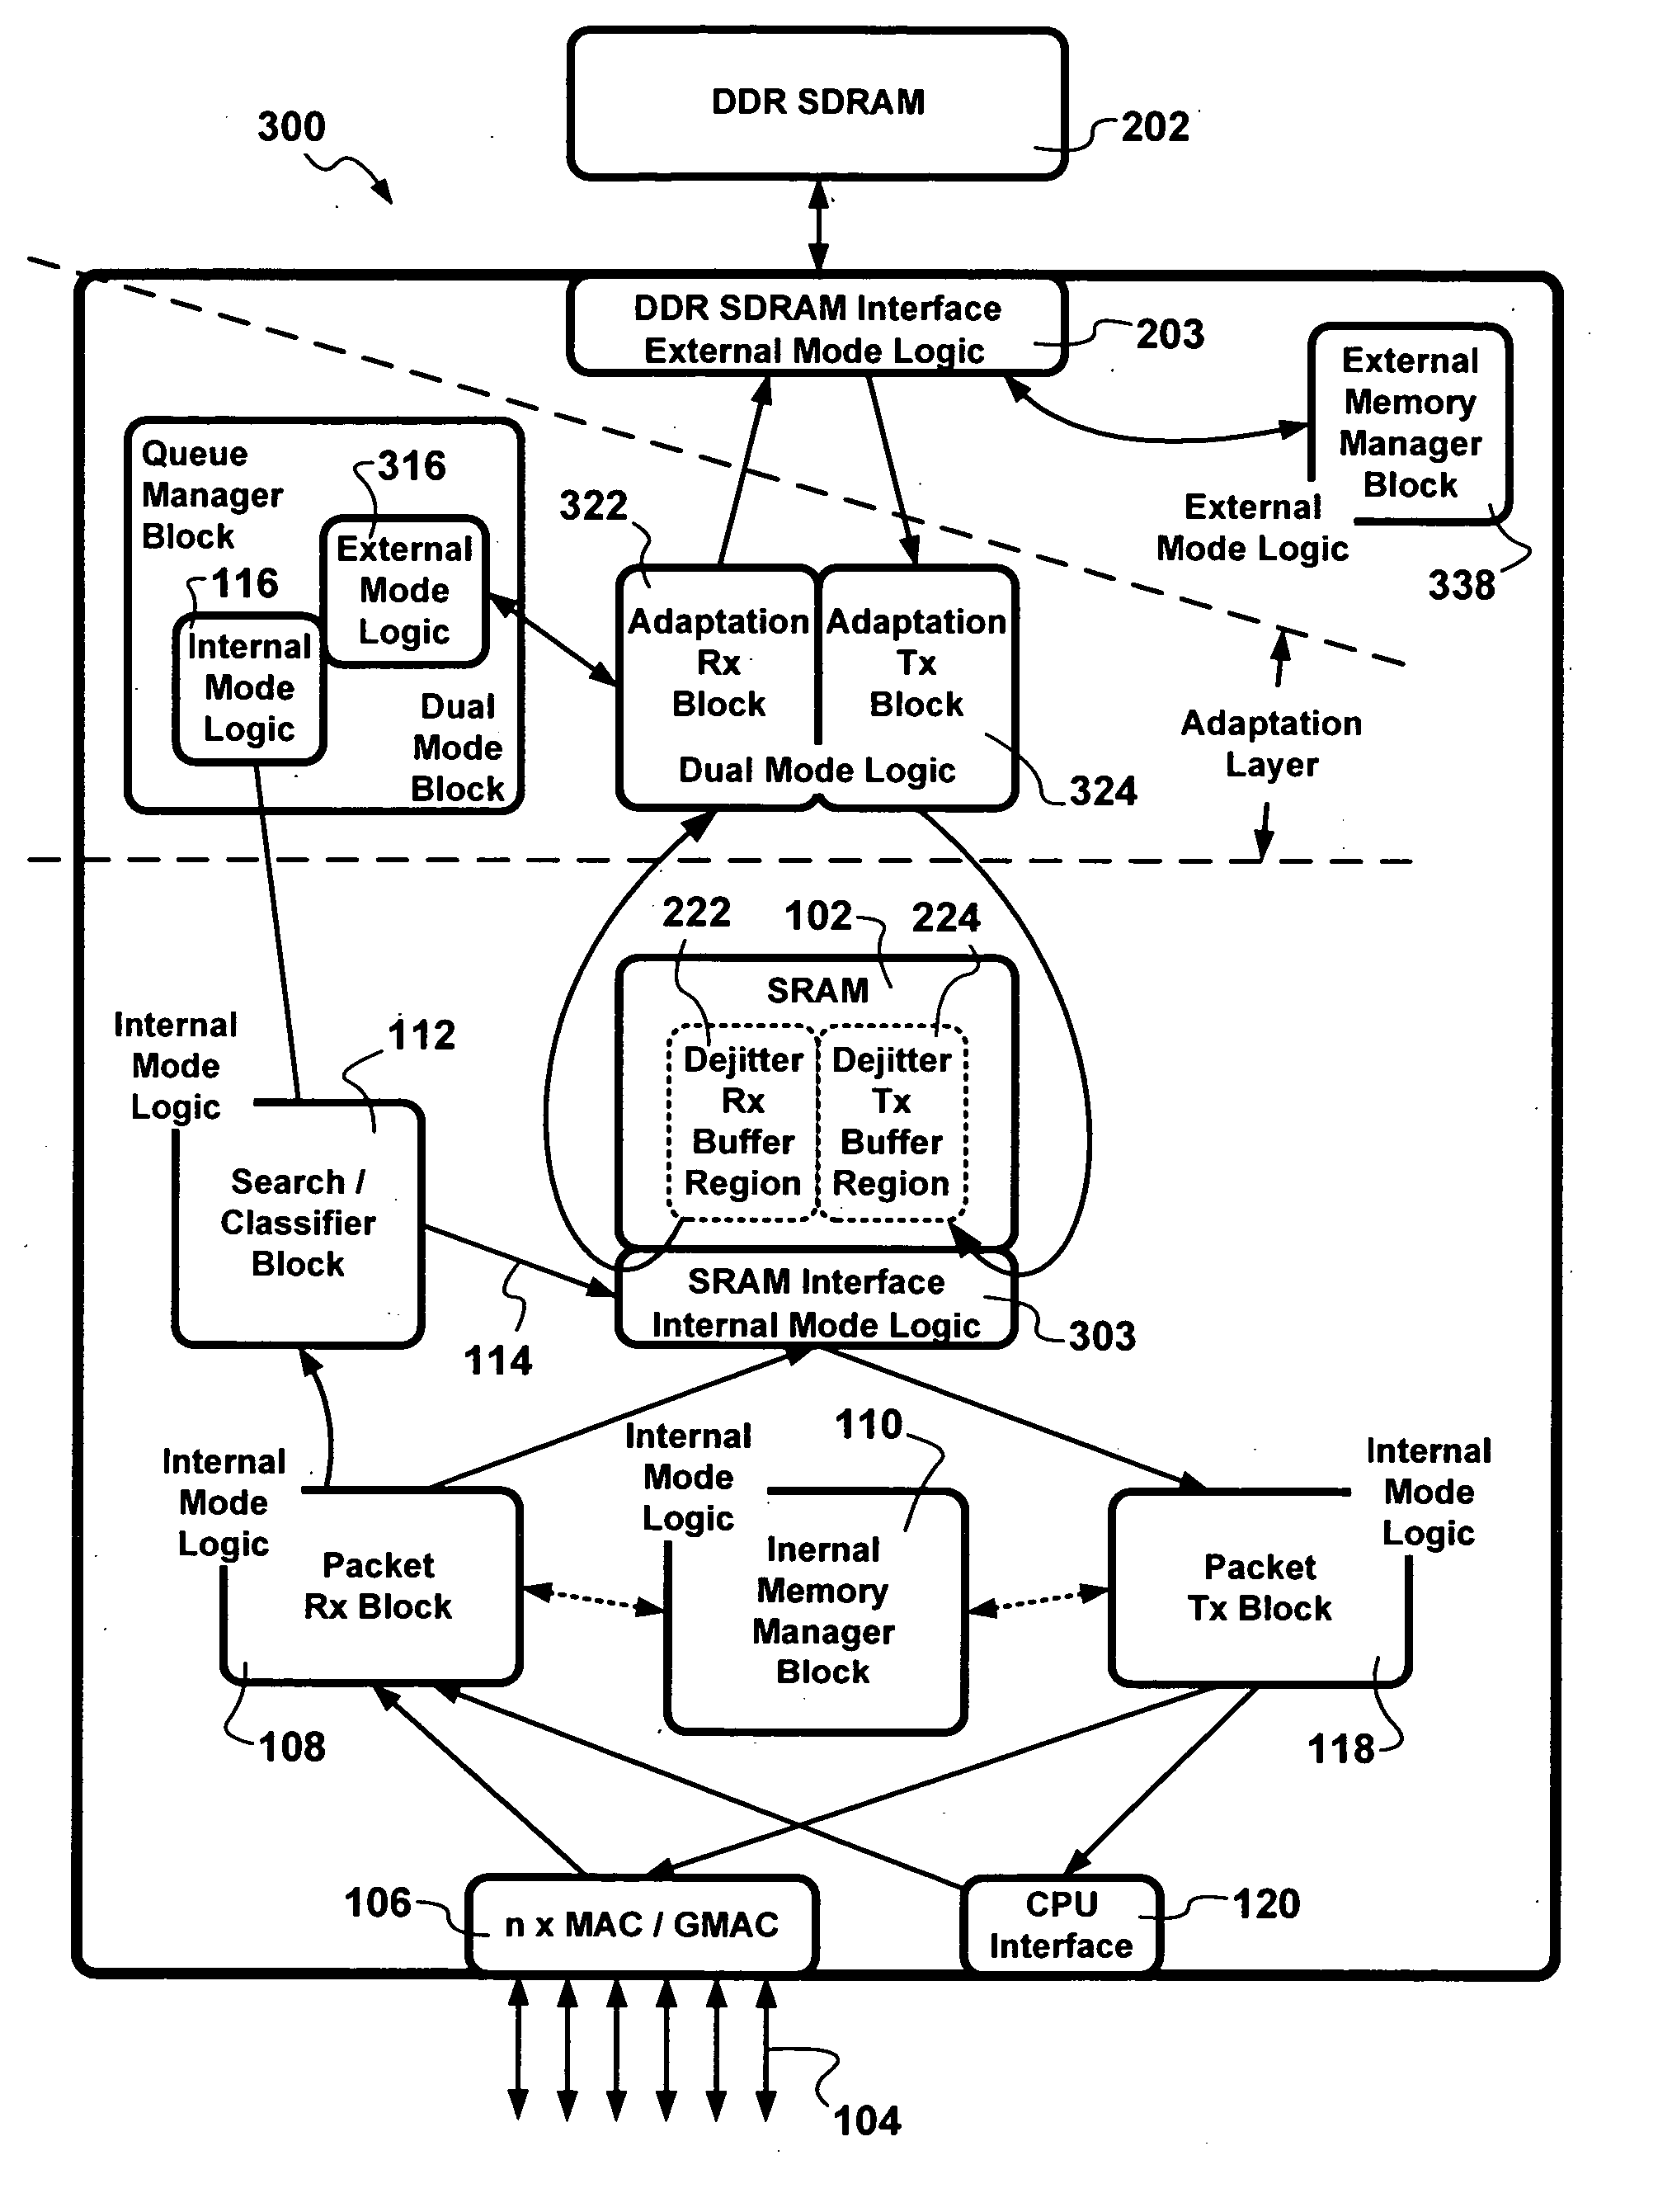 Compact packet switching node storage architecture employing double data rate synchronous dynamic RAM